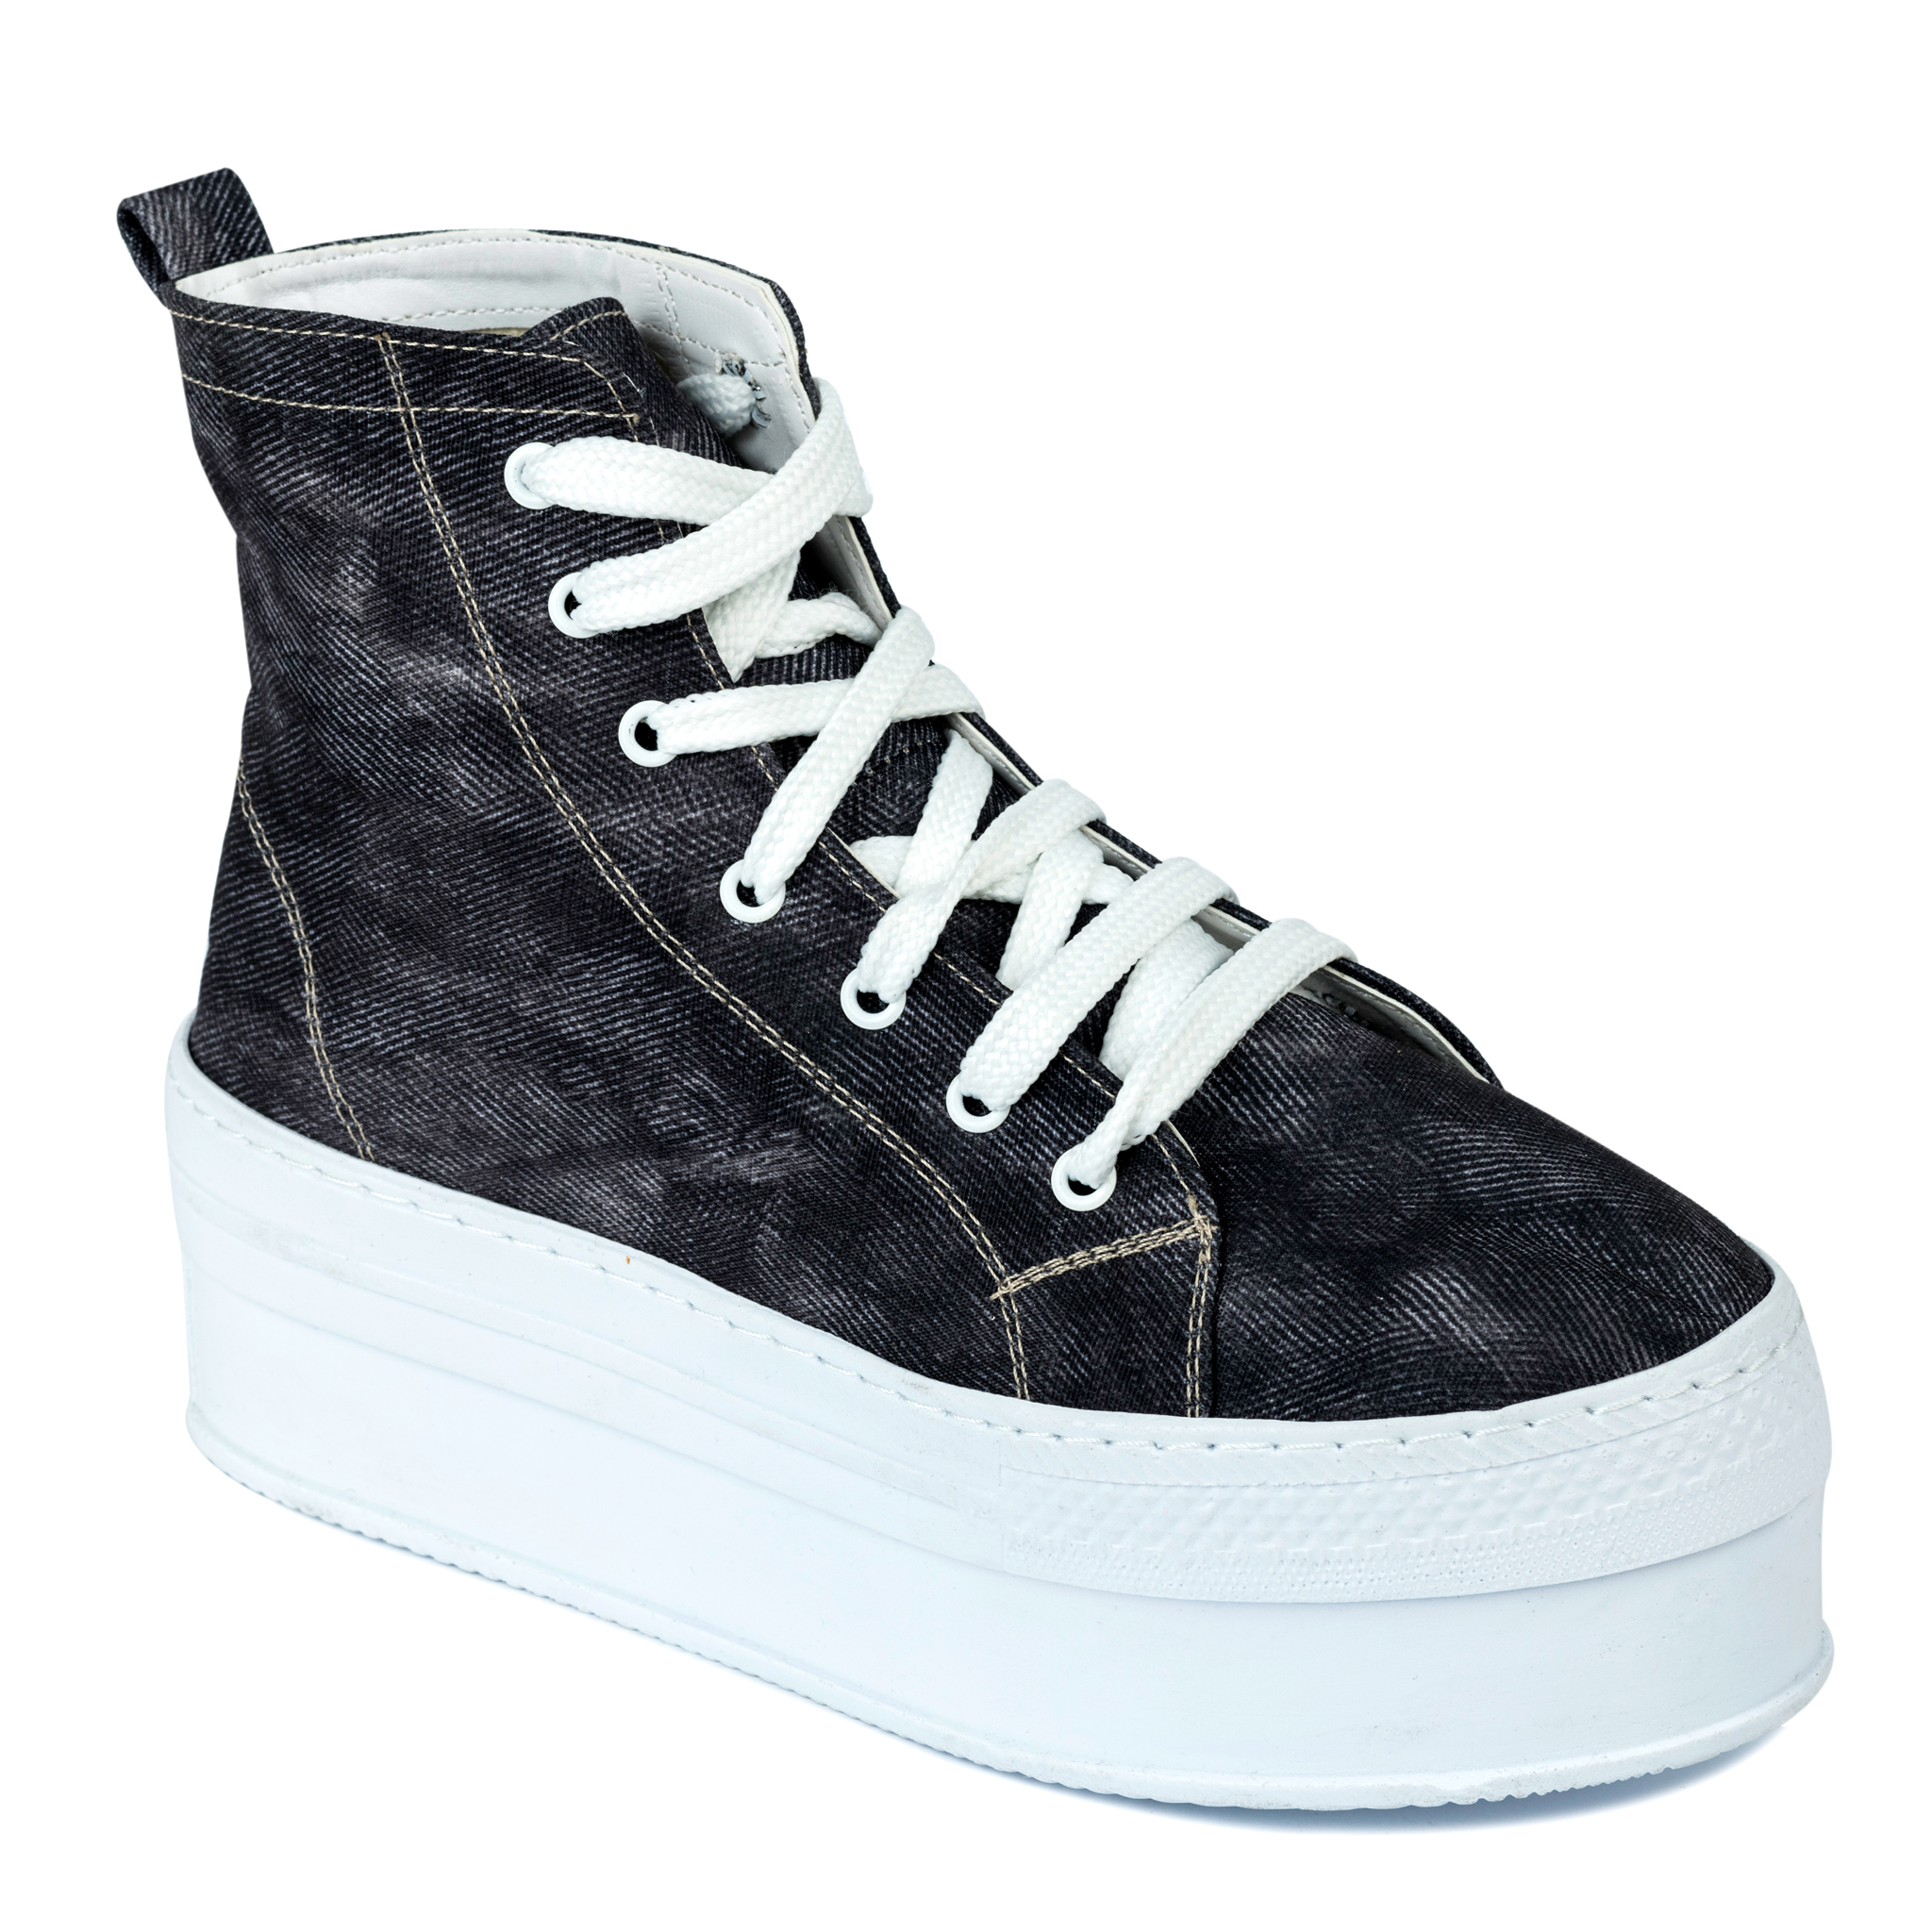 HIGH SOLE ANKLE SNEAKERS - BLACK